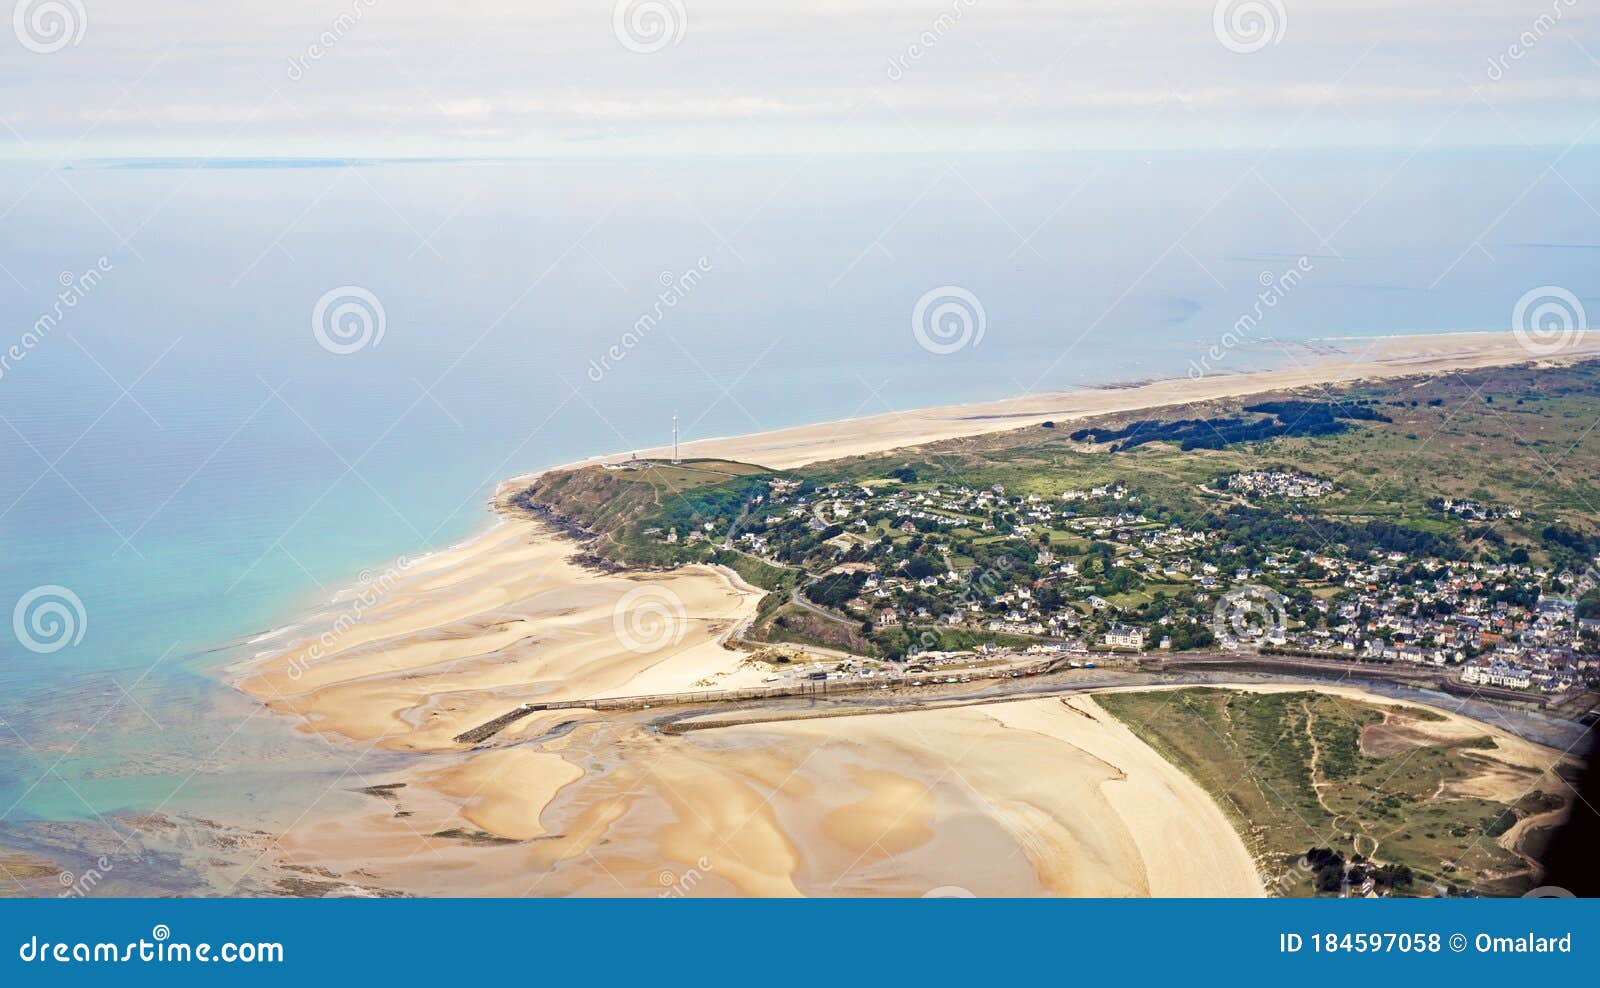 normandy channel sea in france from airplaine